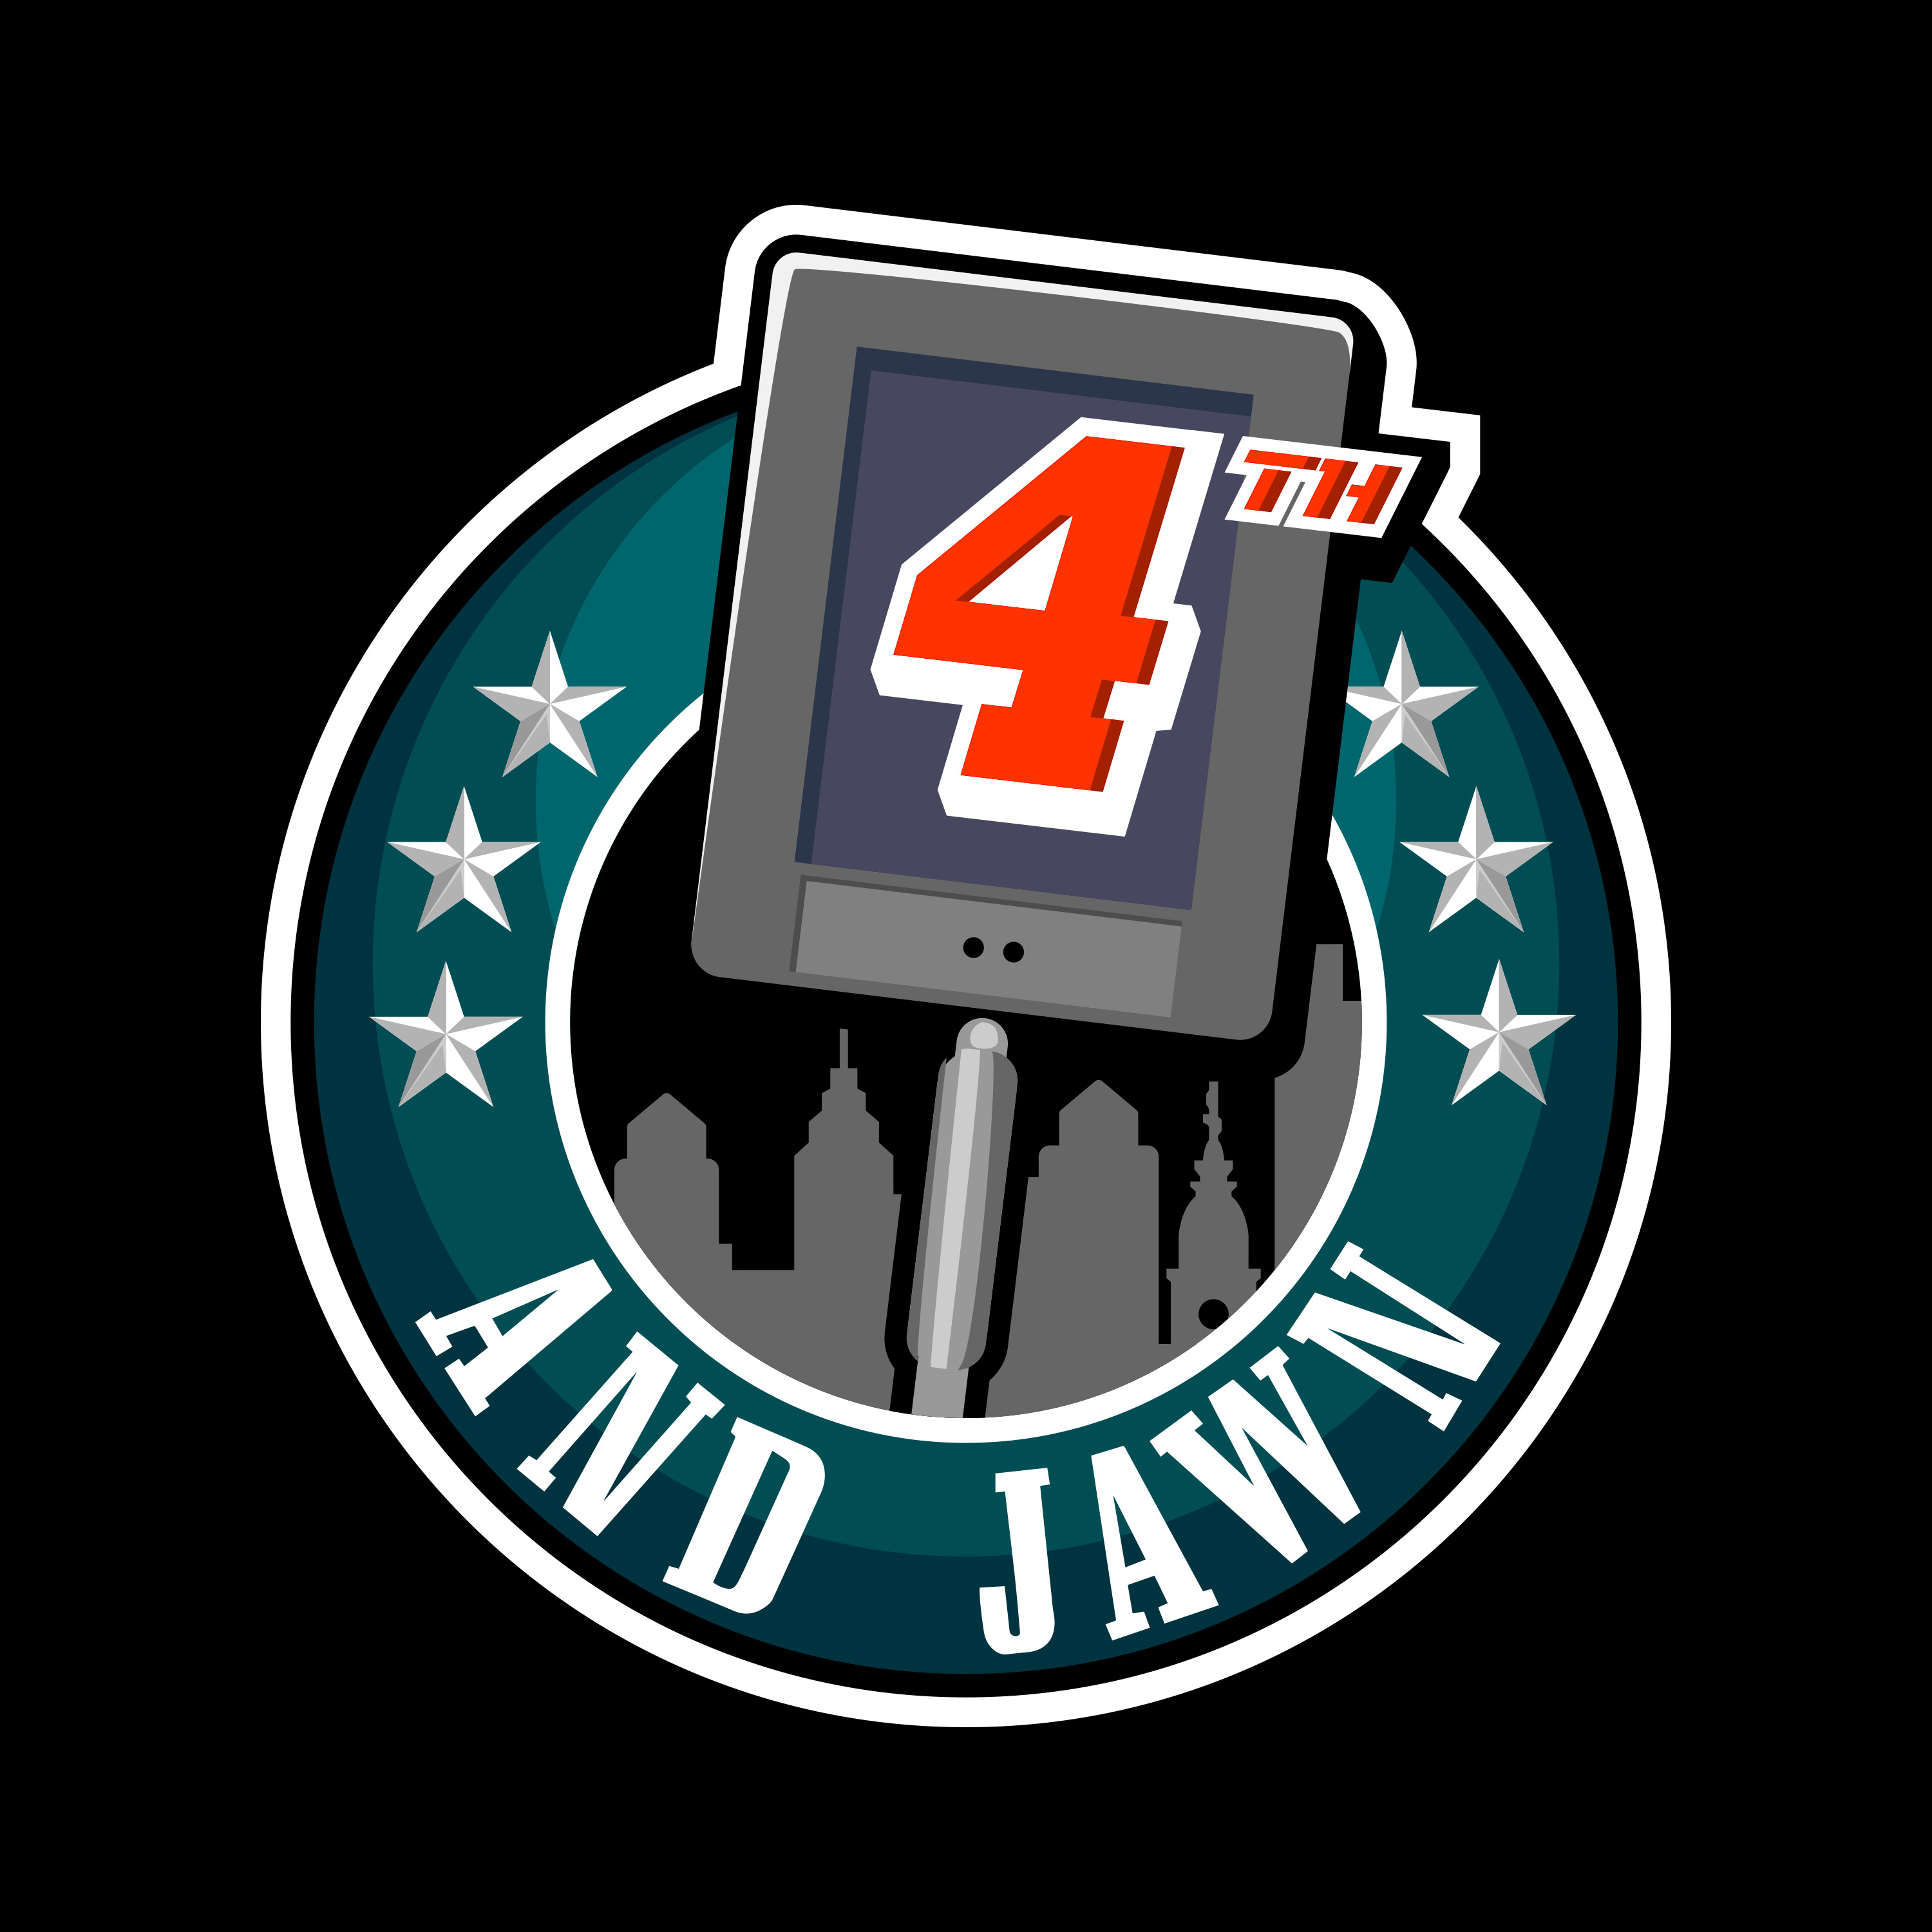 4th and Jawn - Episode 425 - Eagles Superlatives heading into the season